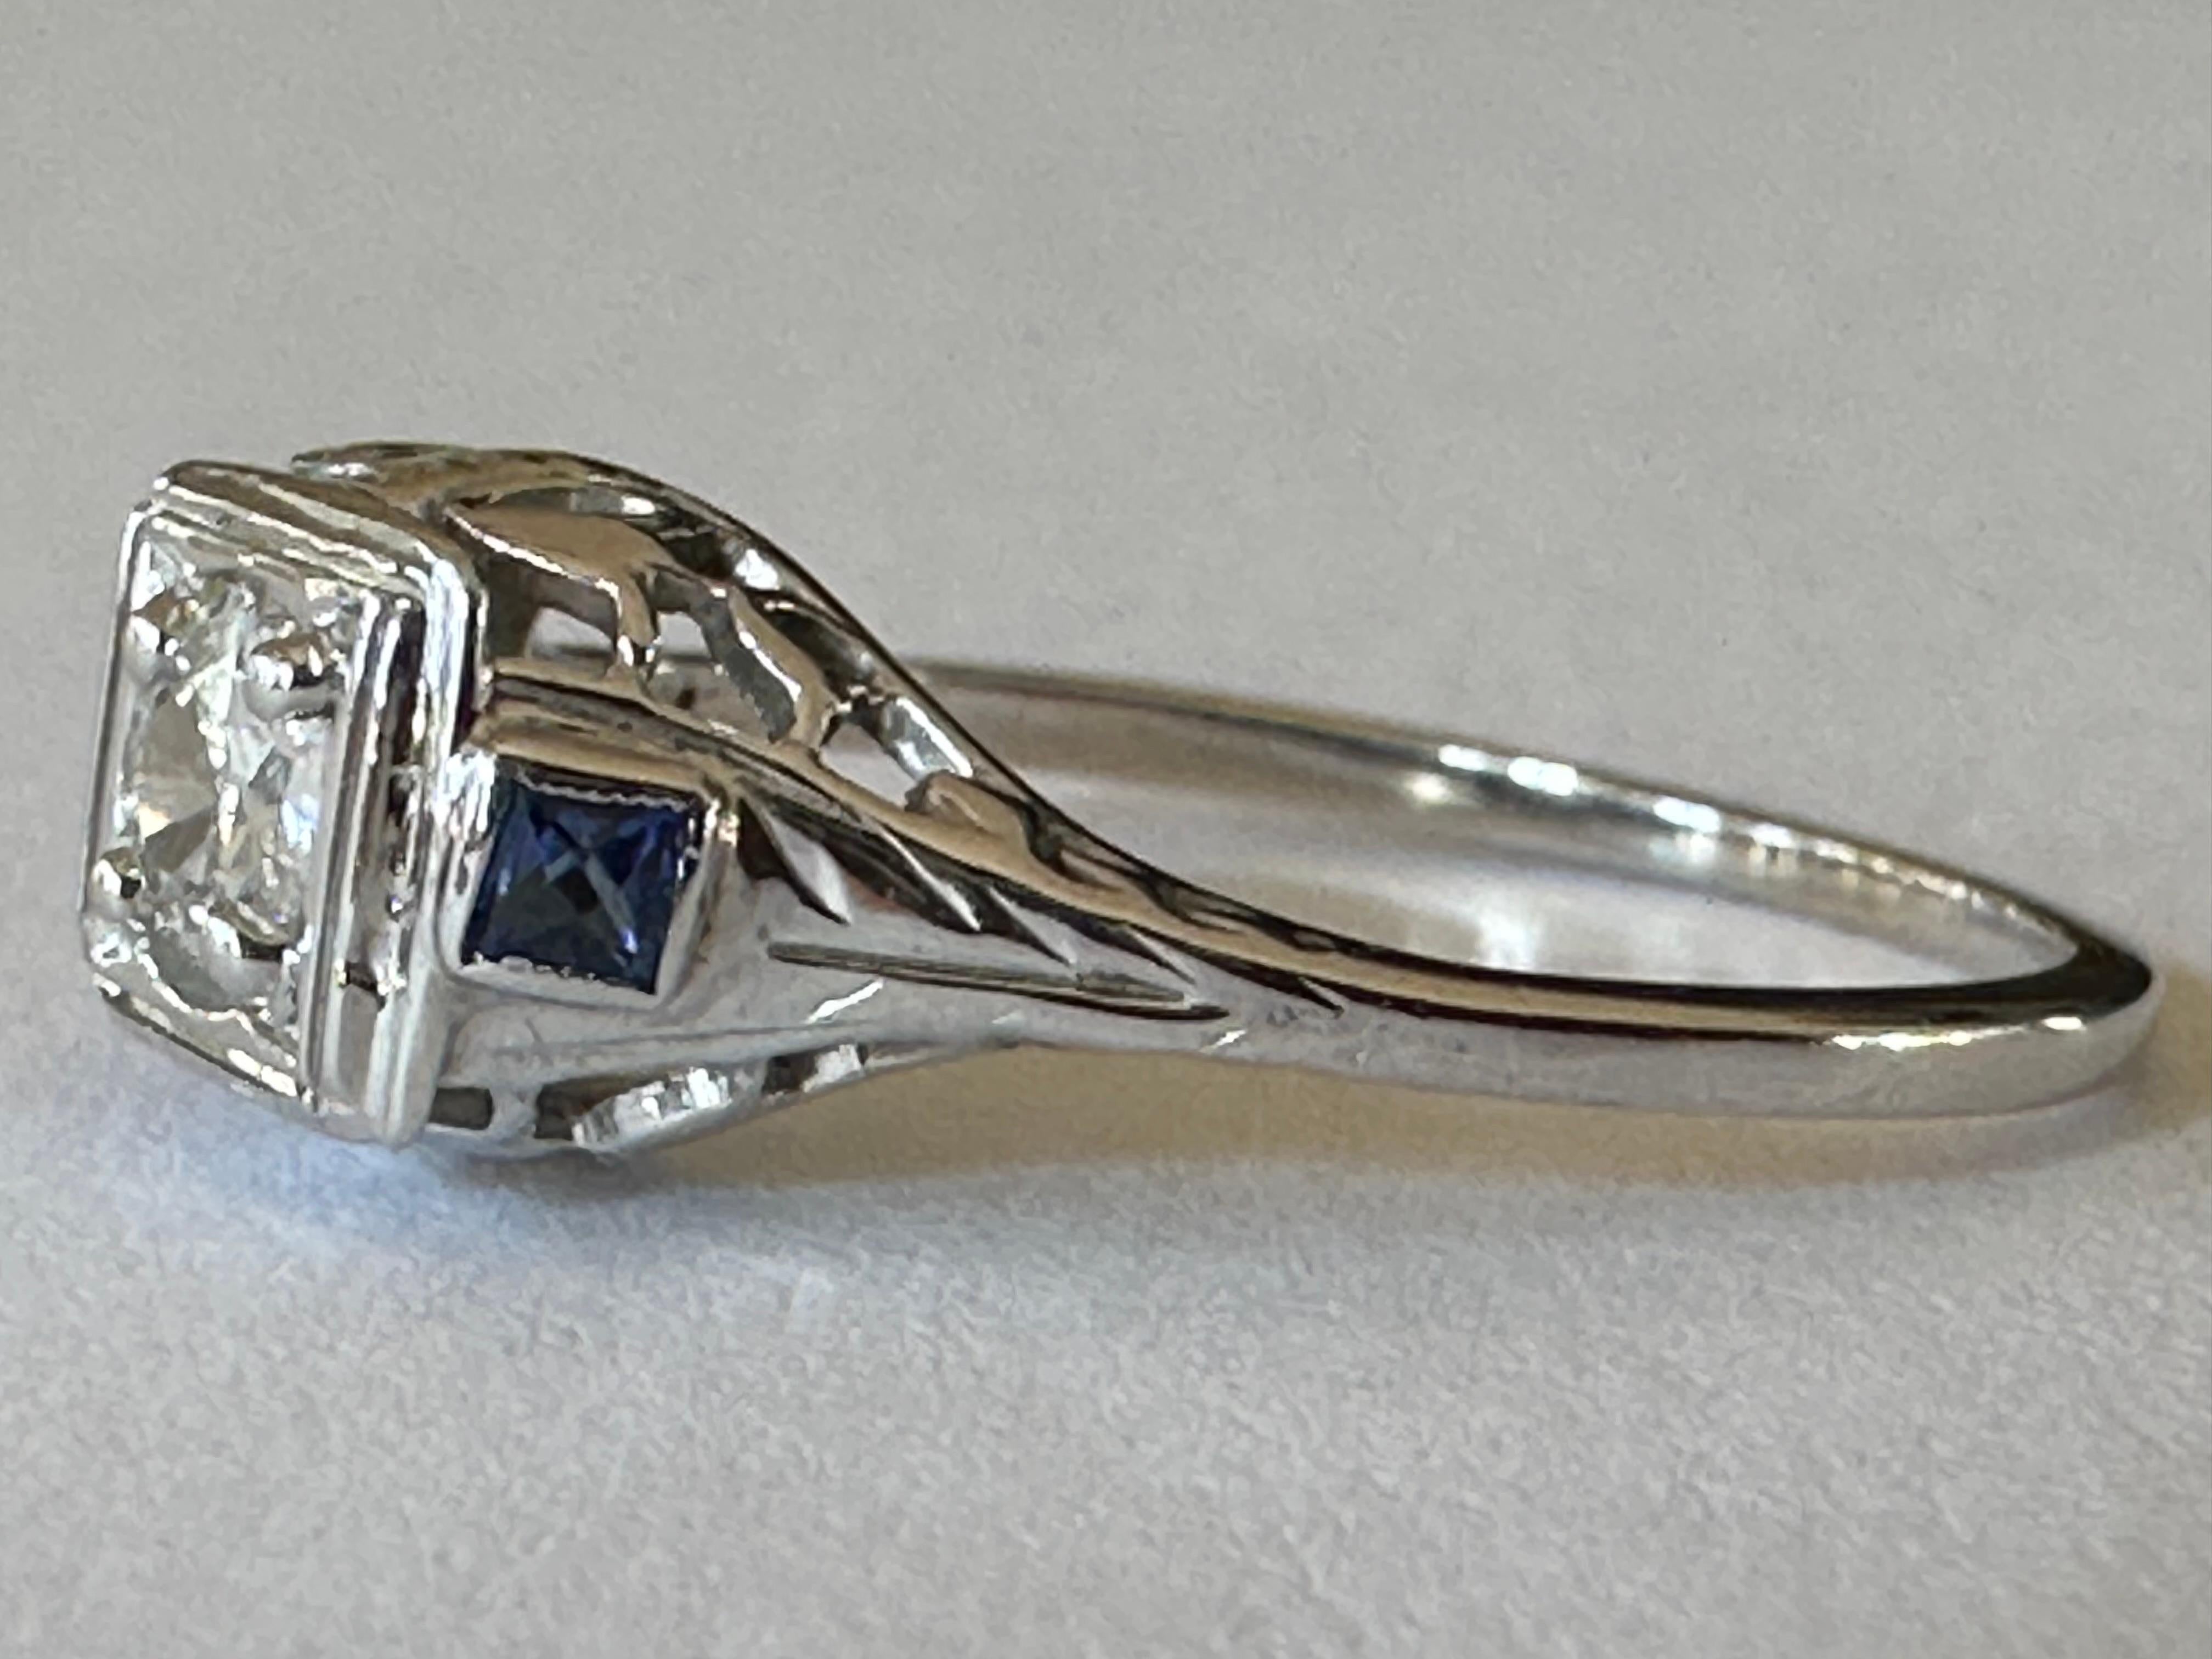 A bold 0.25-carat Old European cut diamond center stone, GH color, SI2 clarity is complemented with two  blue sapphires and intricate filigree in this stunning Art Deco ring handcrafted in 18K white gold. 